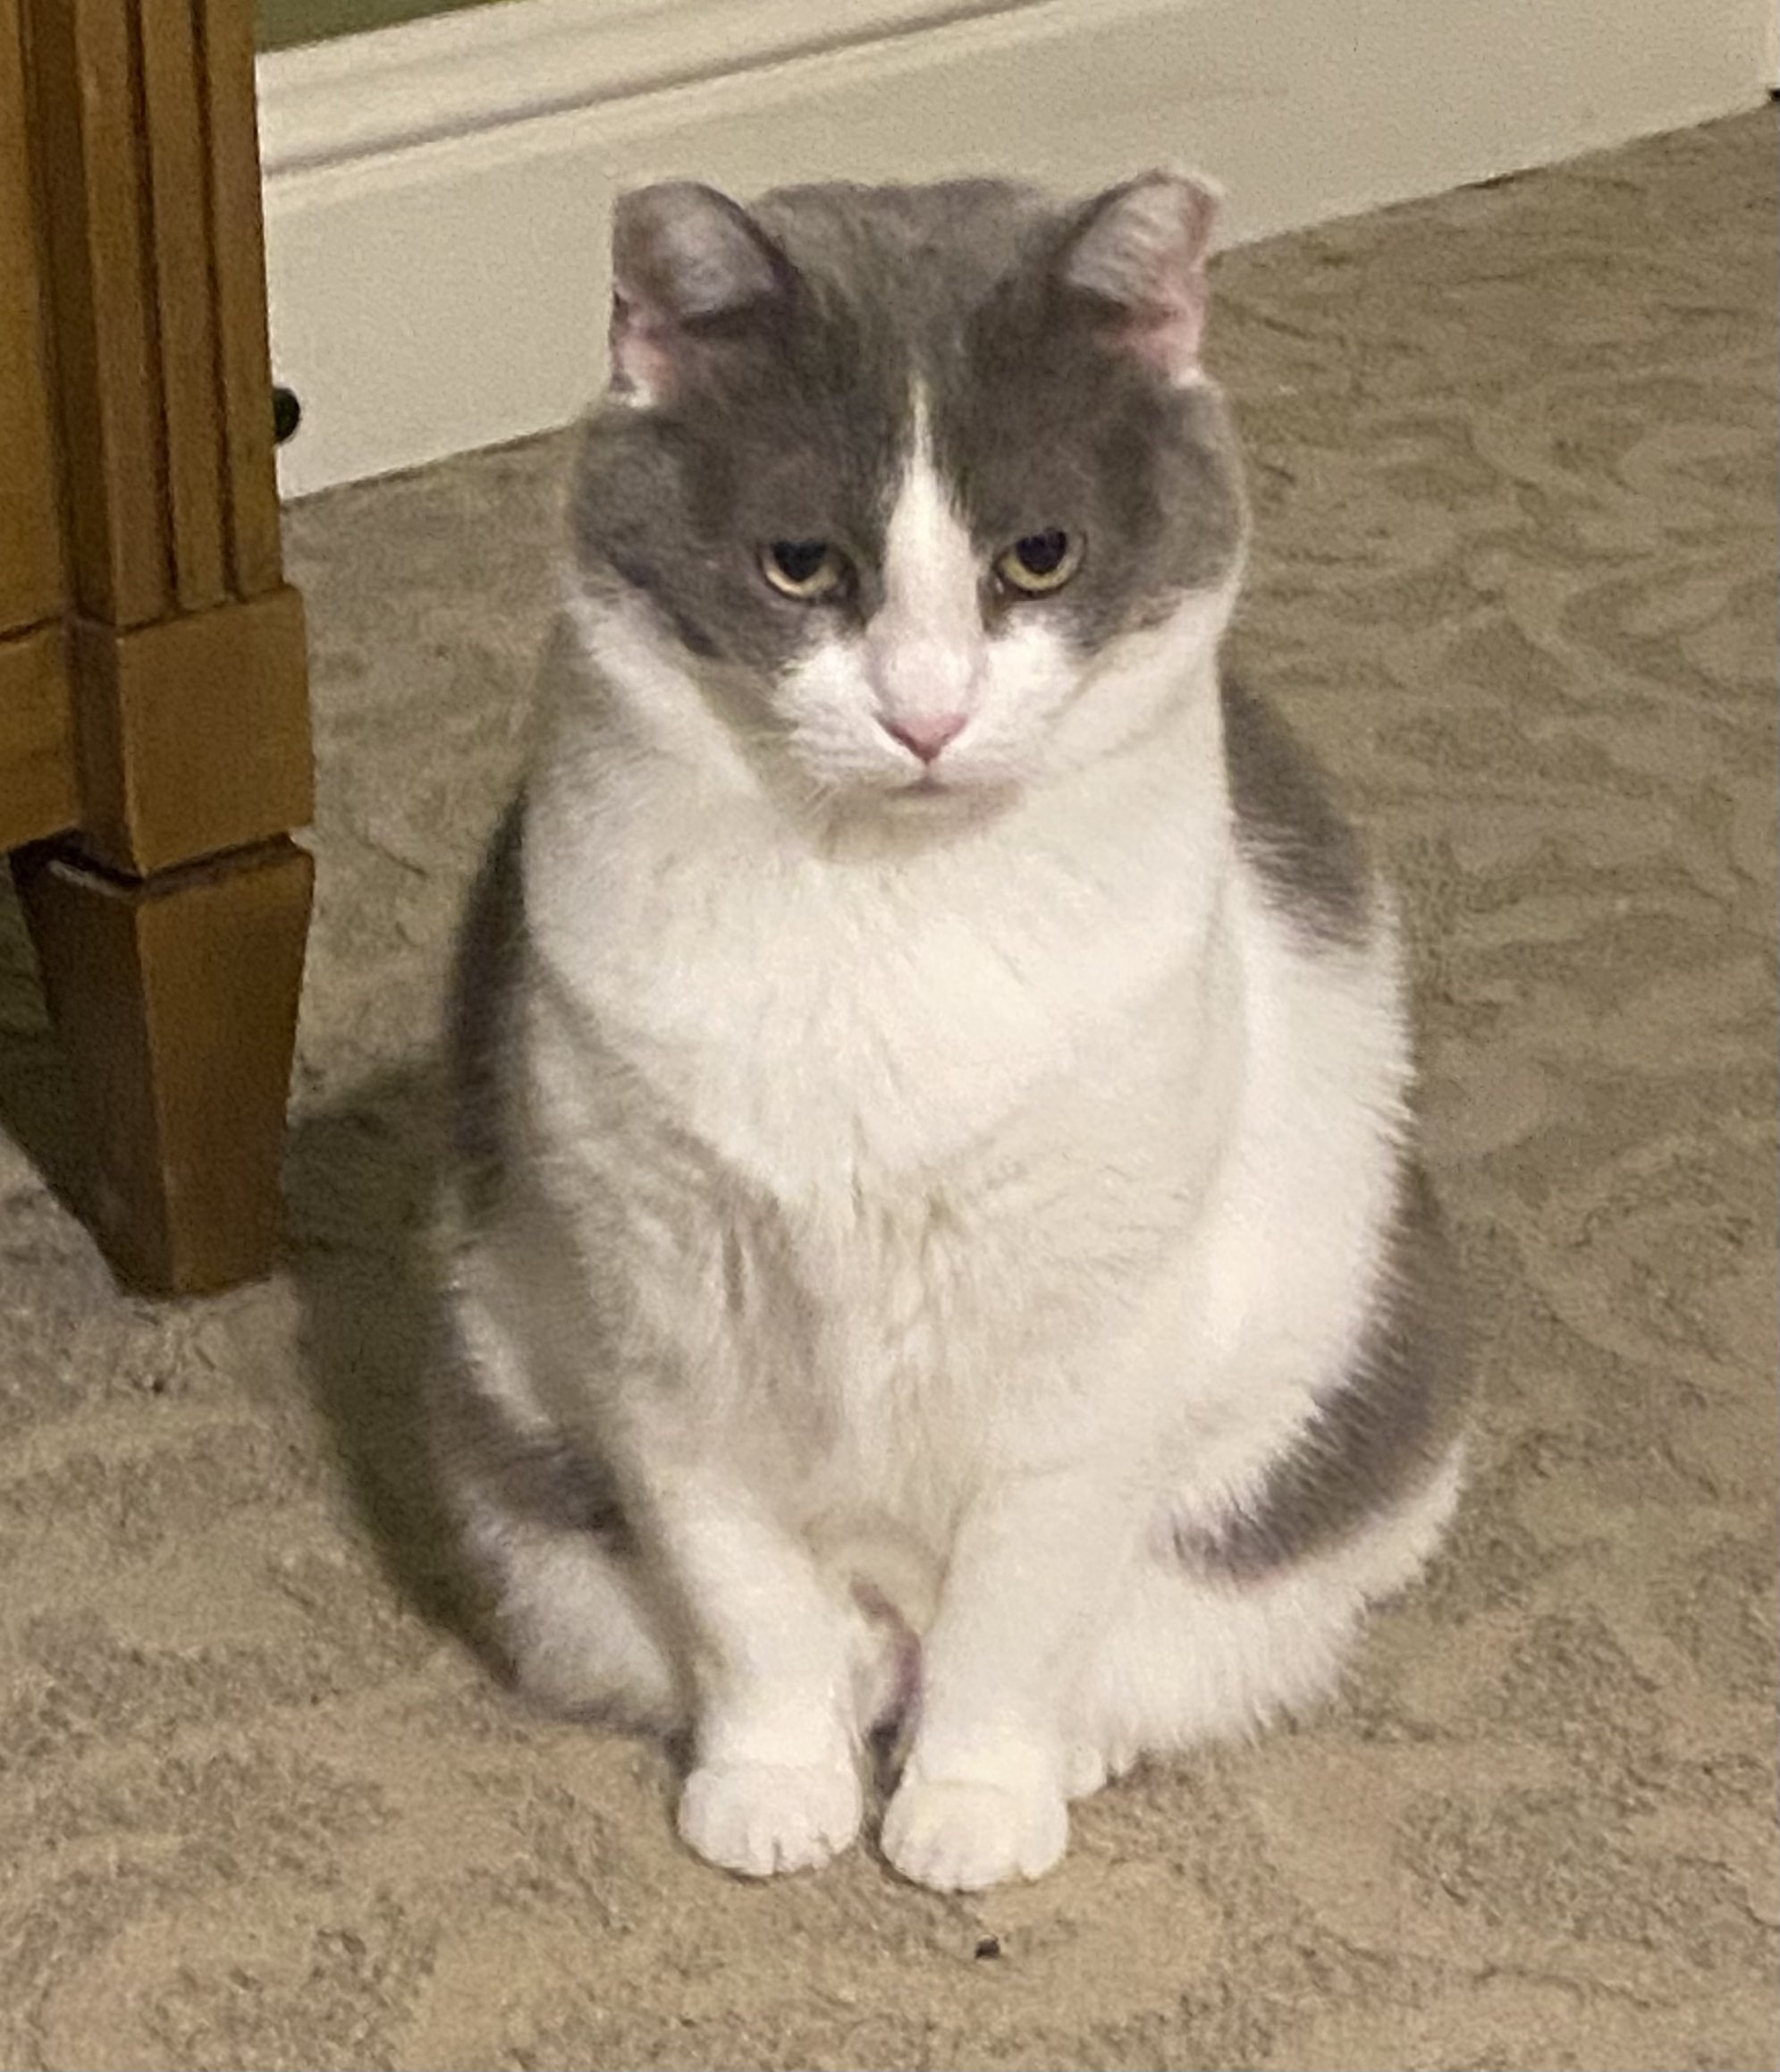 A grey and white cat sitting on a beige carpet